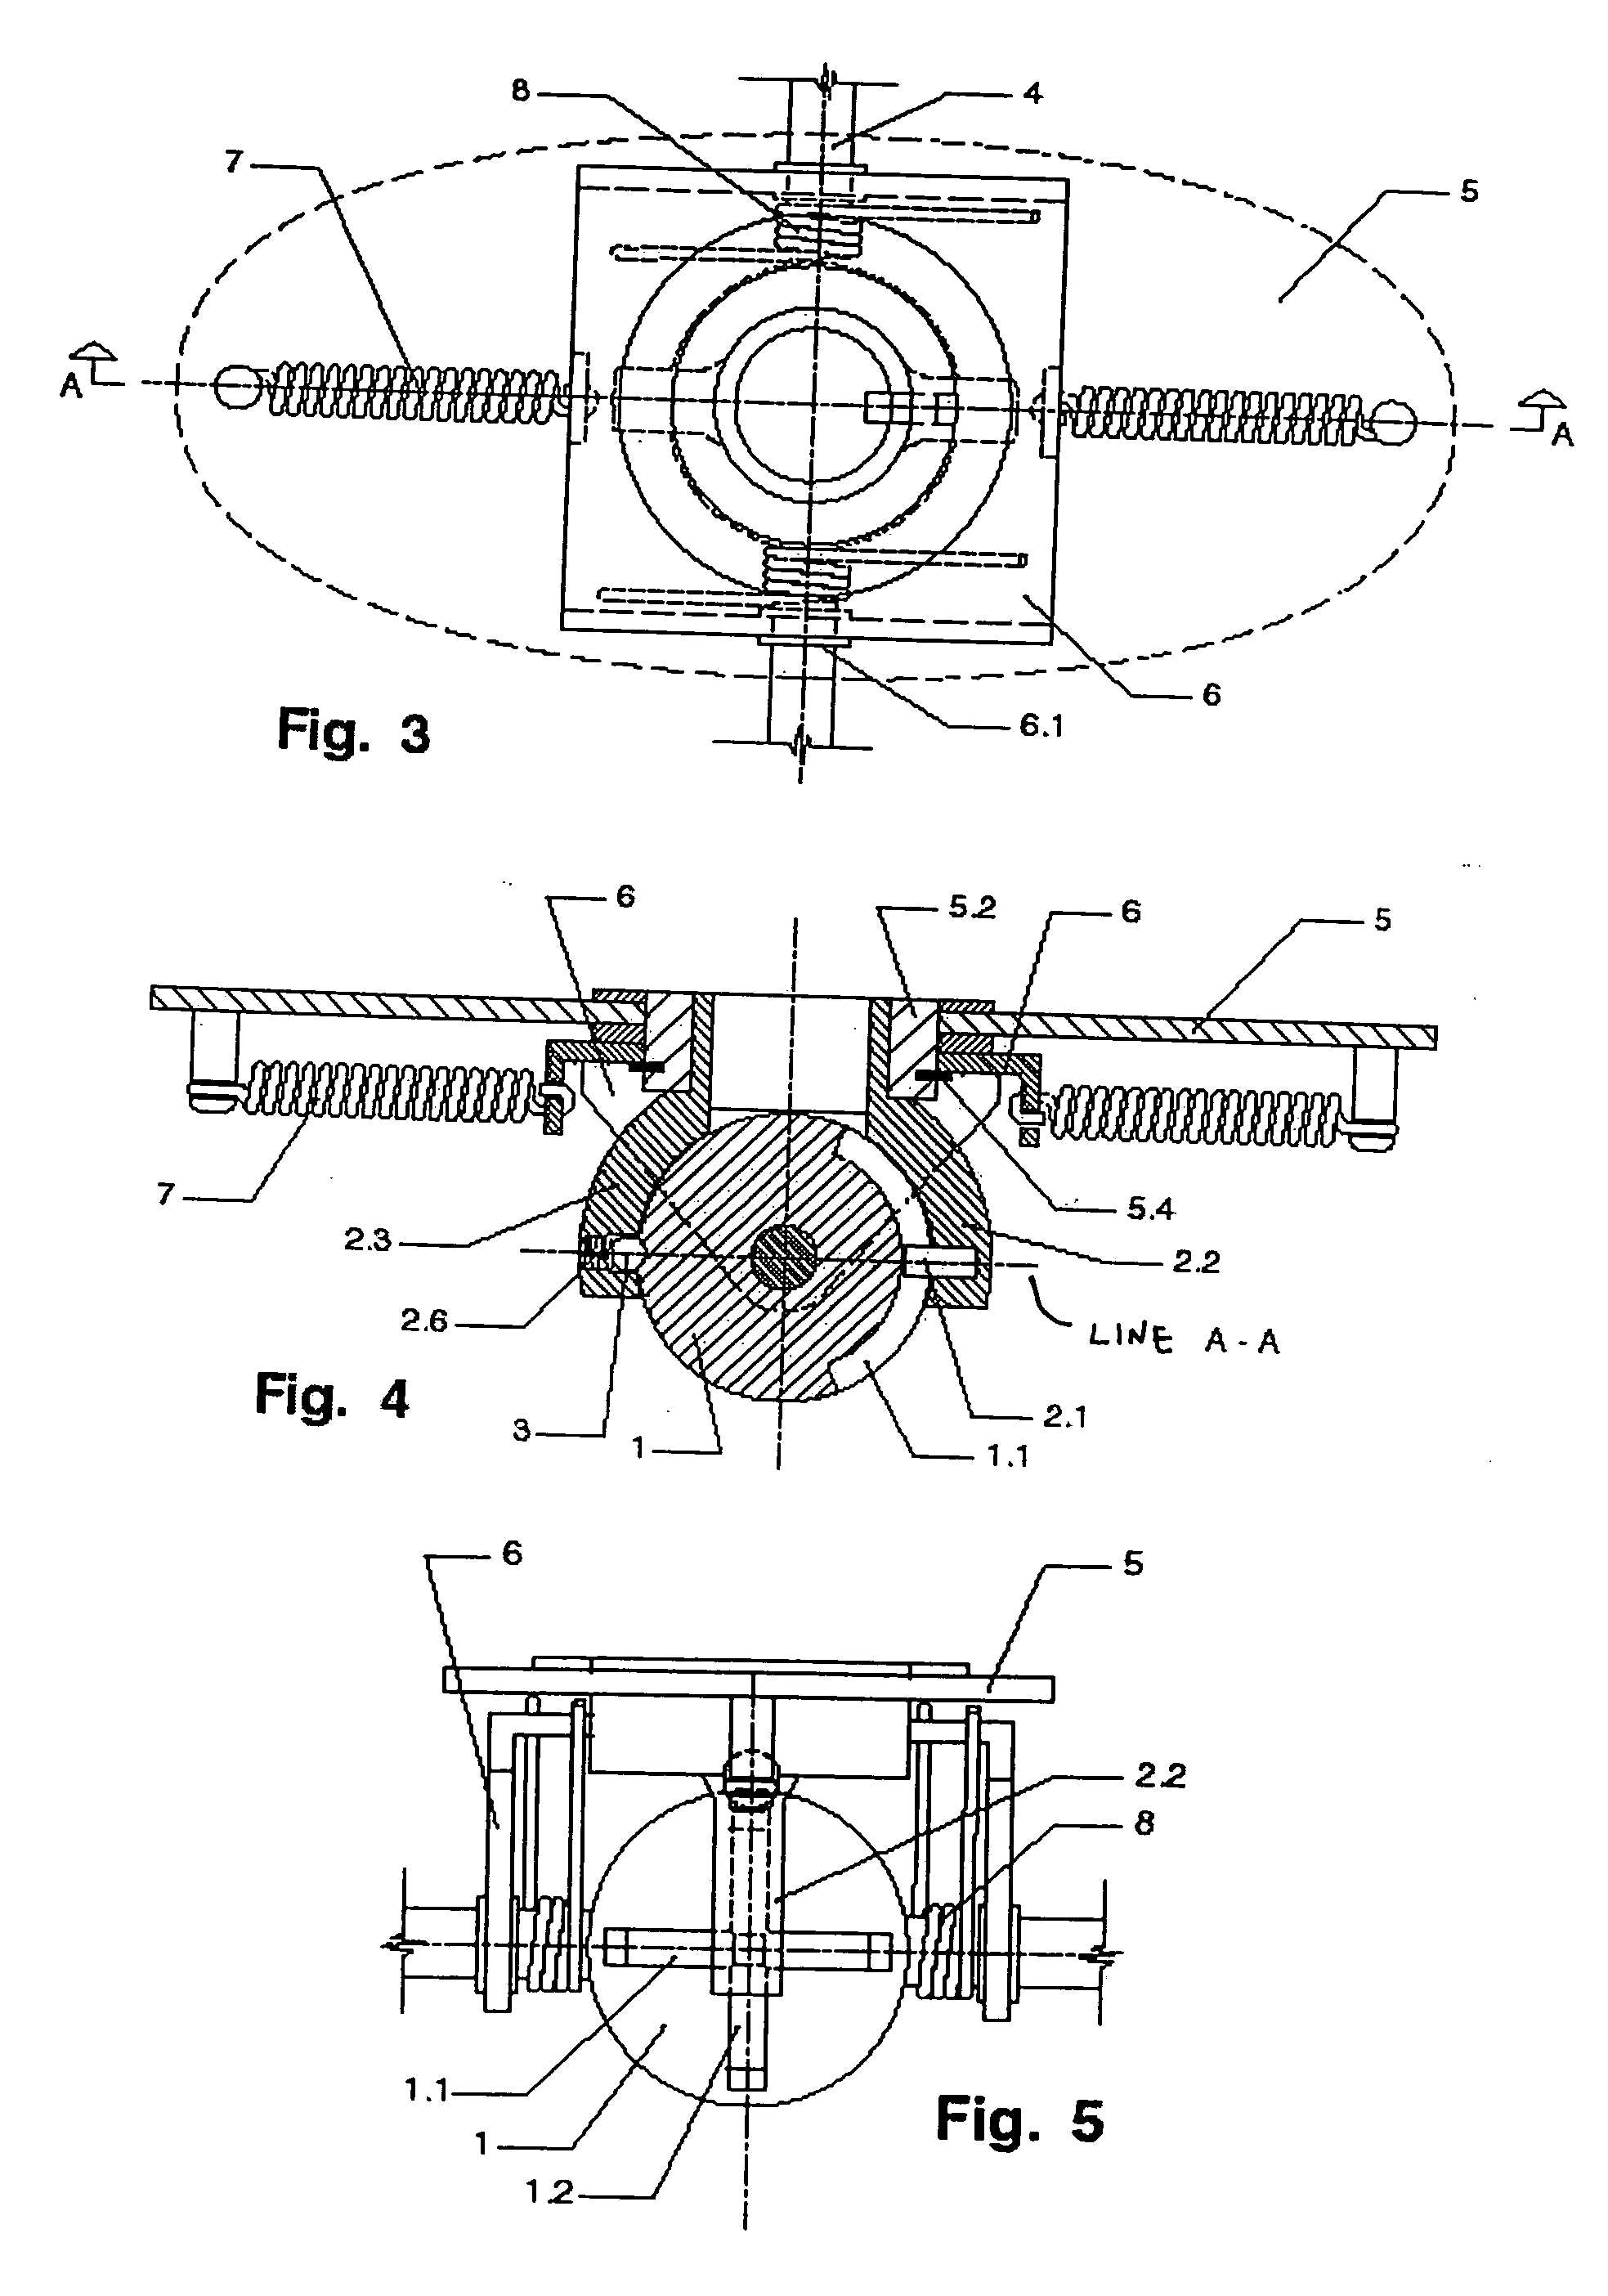 Mechanical device for performing single, orthogonal, alternate, and independent movements applicable to a gym apparatus